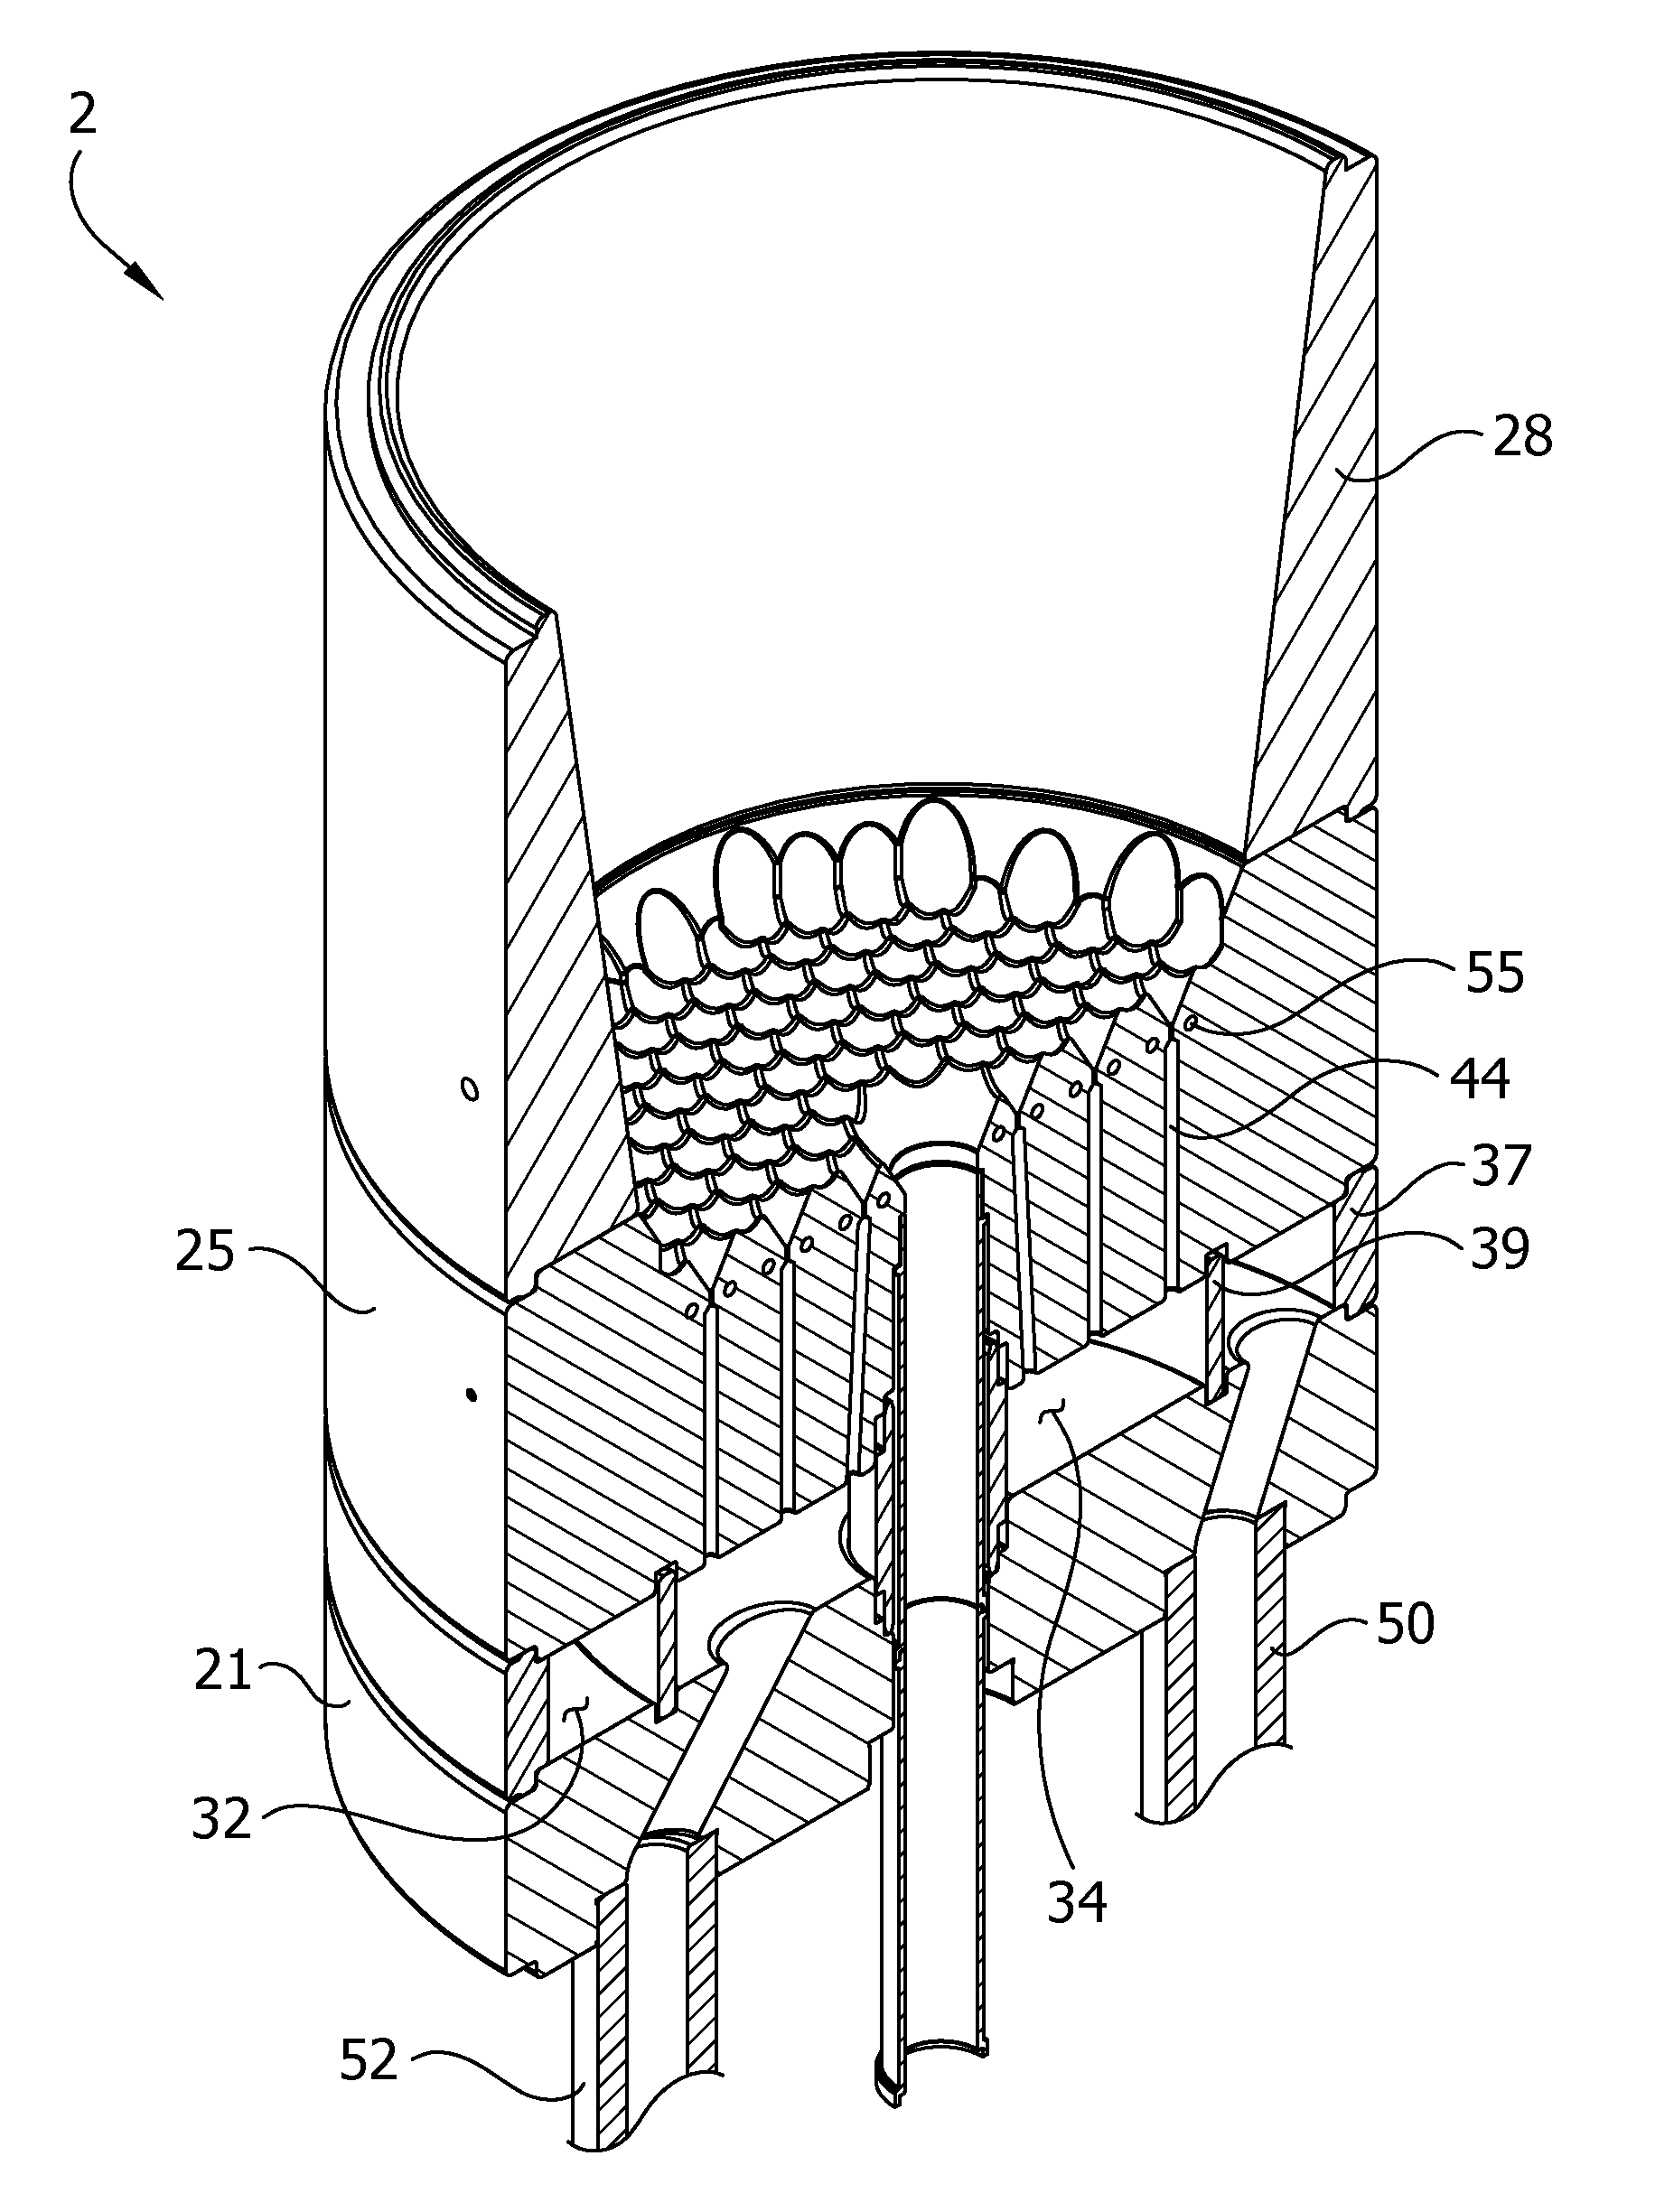 Fluidized bed reactor systems and methods for reducing the deposition of silicon on reactor walls